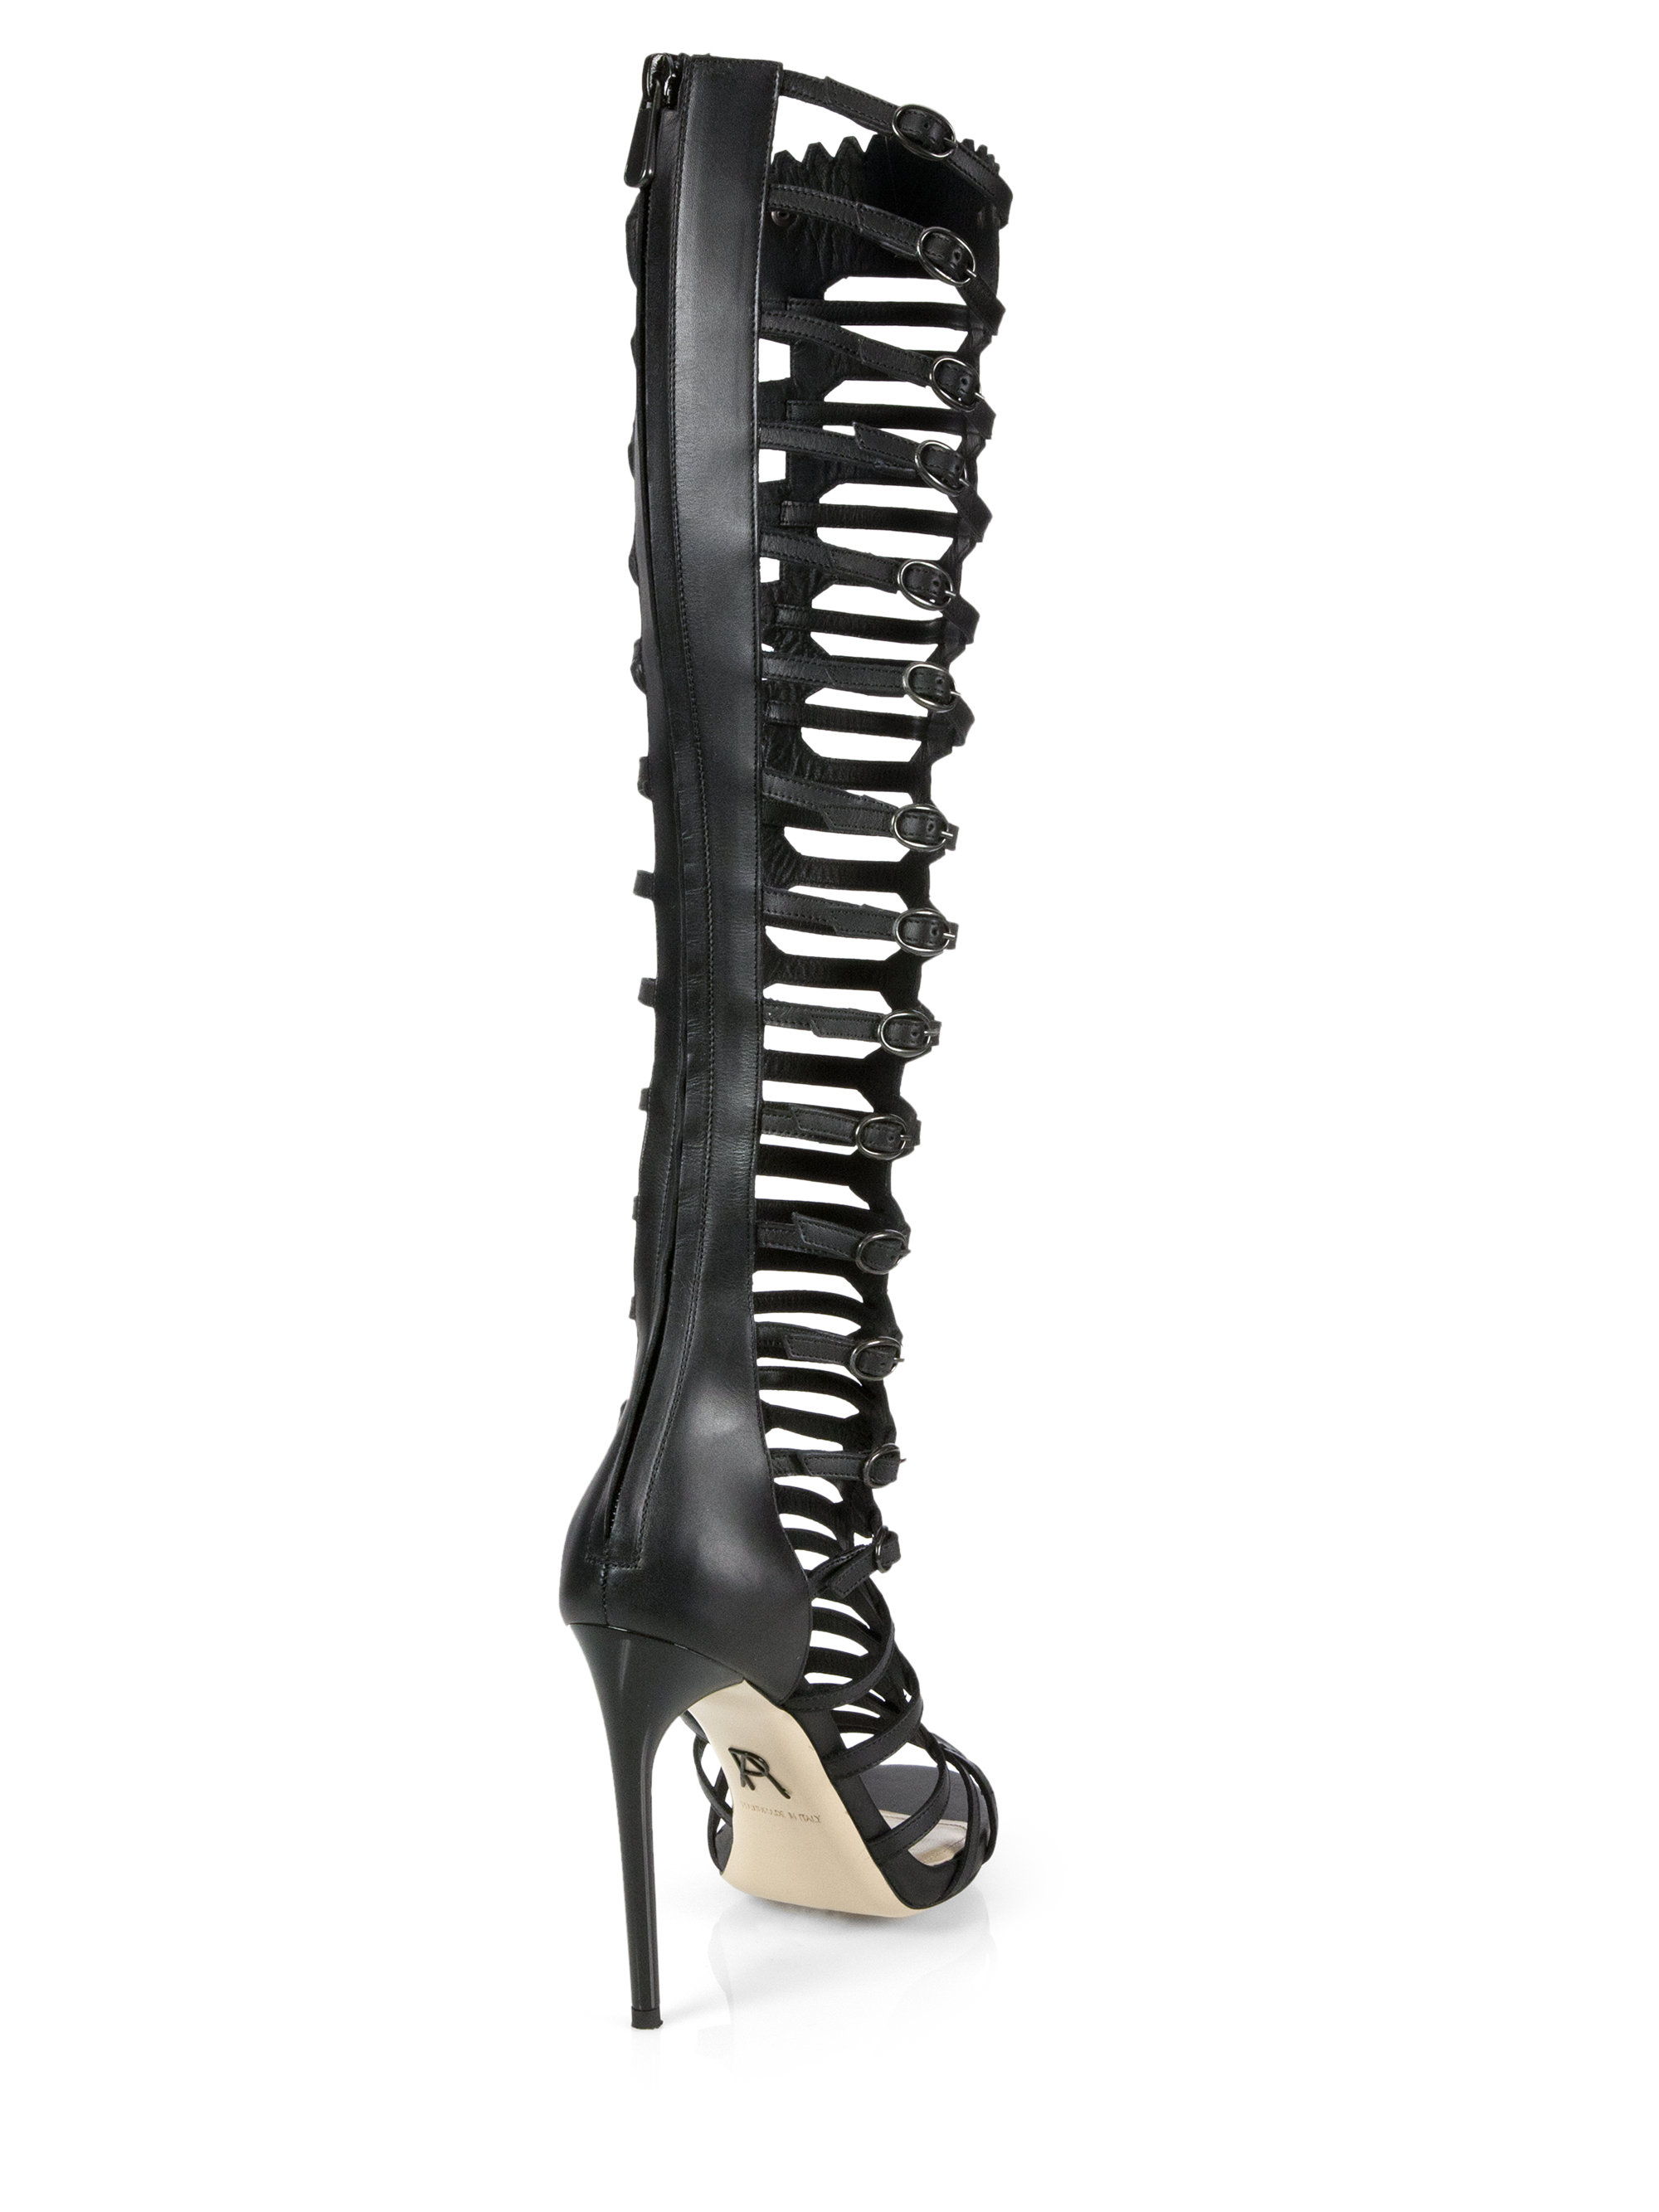 Lyst - Paul Andrew Athena Knee-High Gladiator Sandals in Black